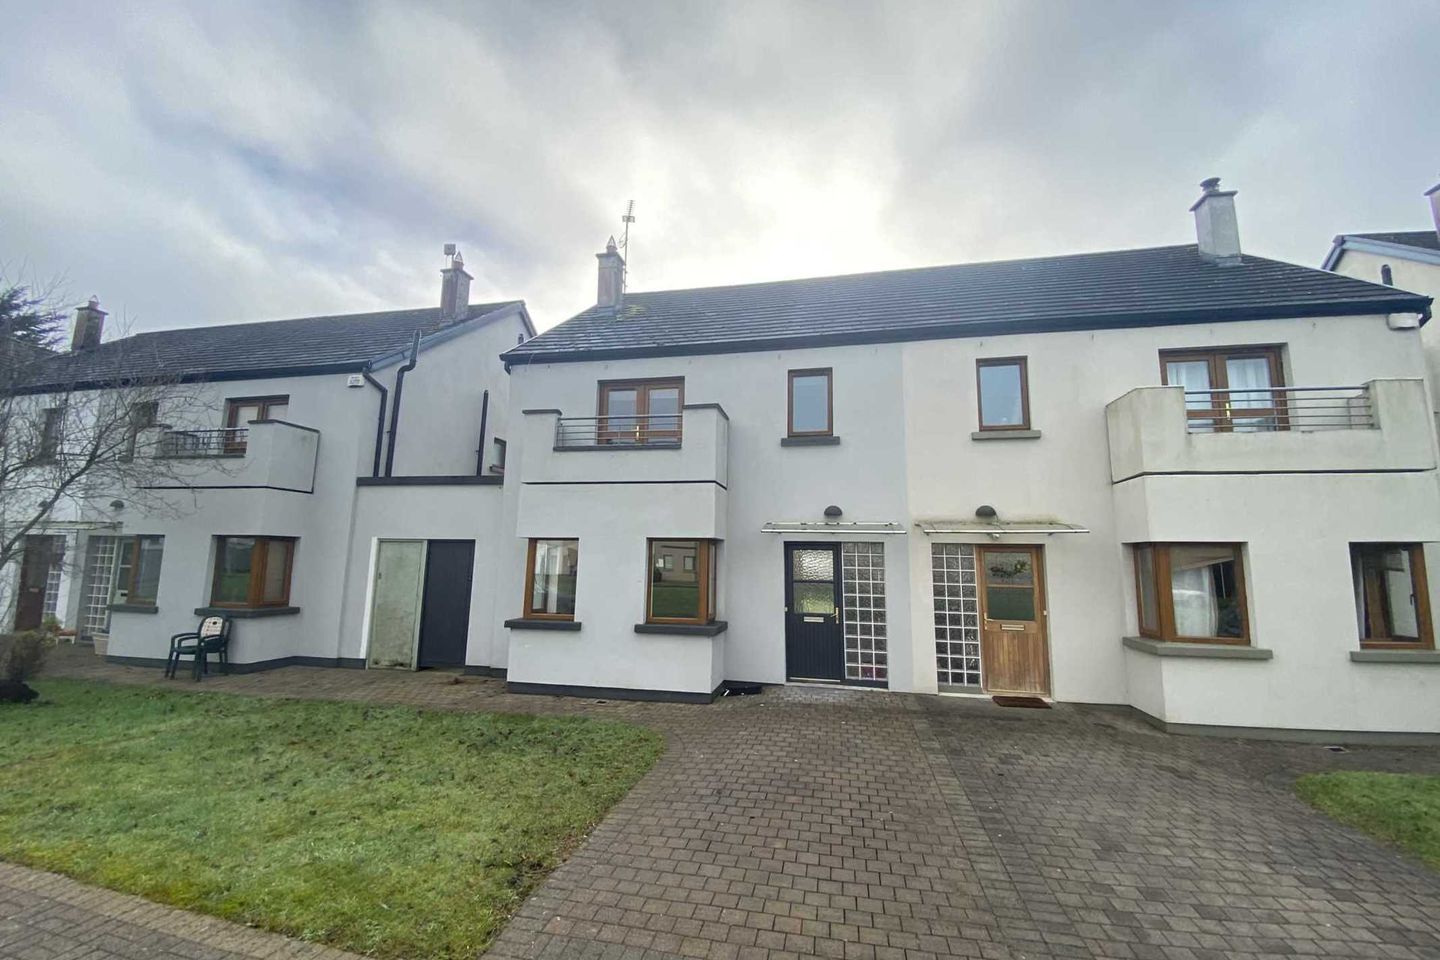 17 Dromsally Woods, Cappamore, Co. Limerick